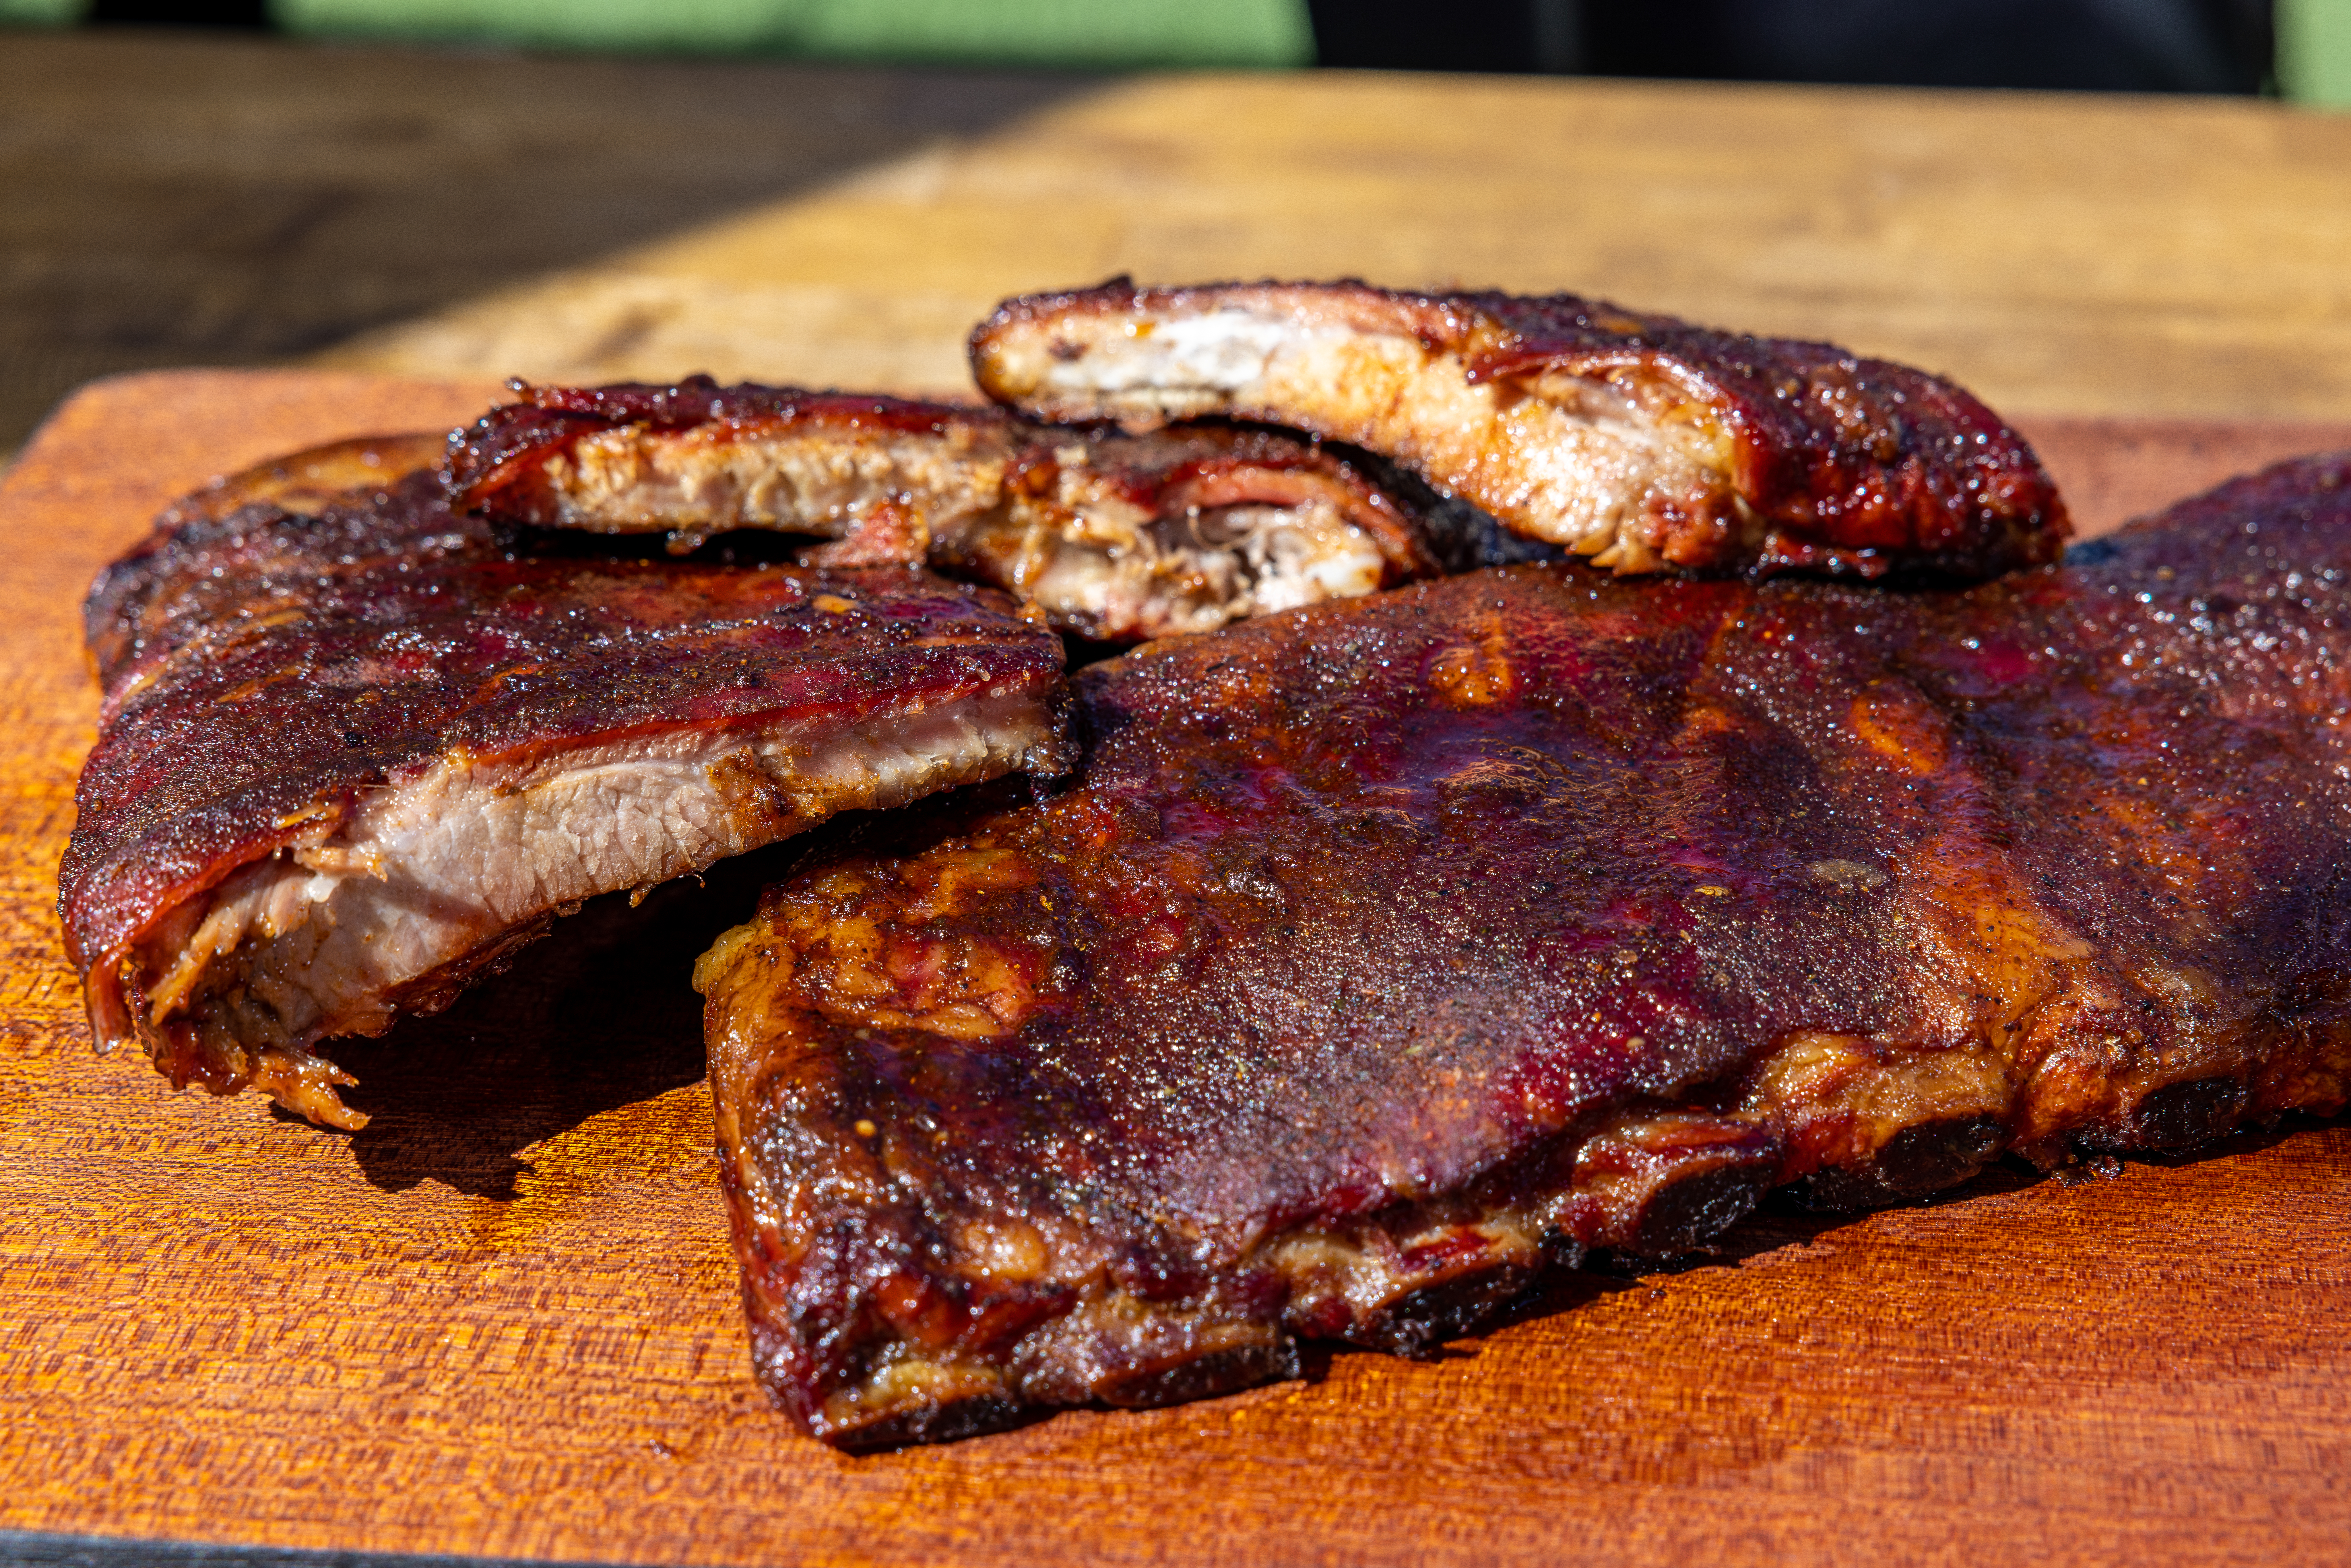 Up close of partially separated, cooked ribs on wood board